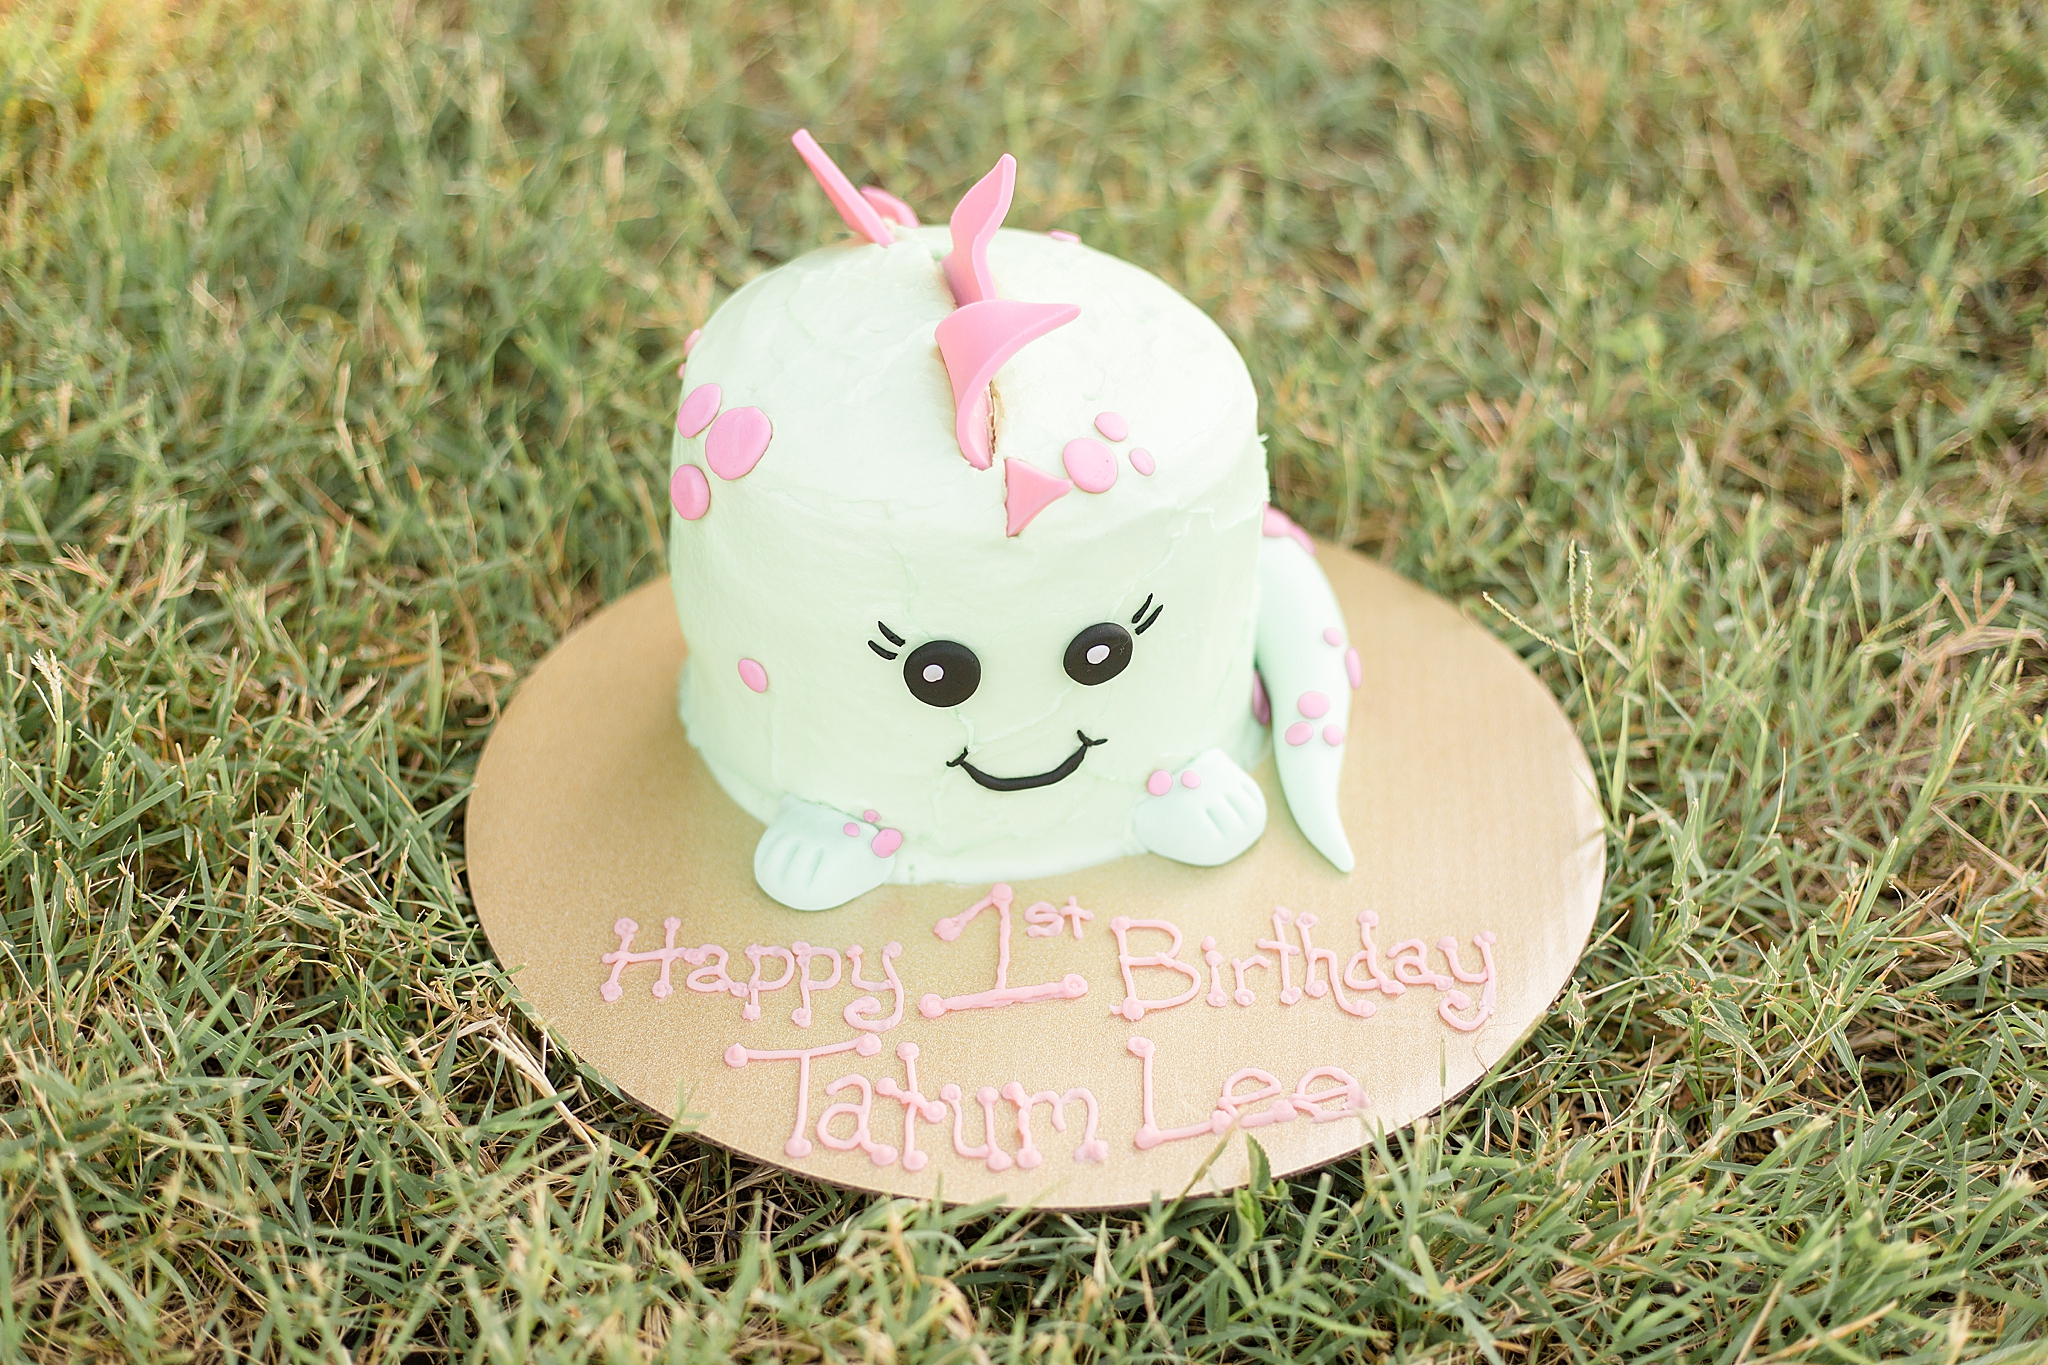 green and pink dinosaur cake for cake smash in Texas